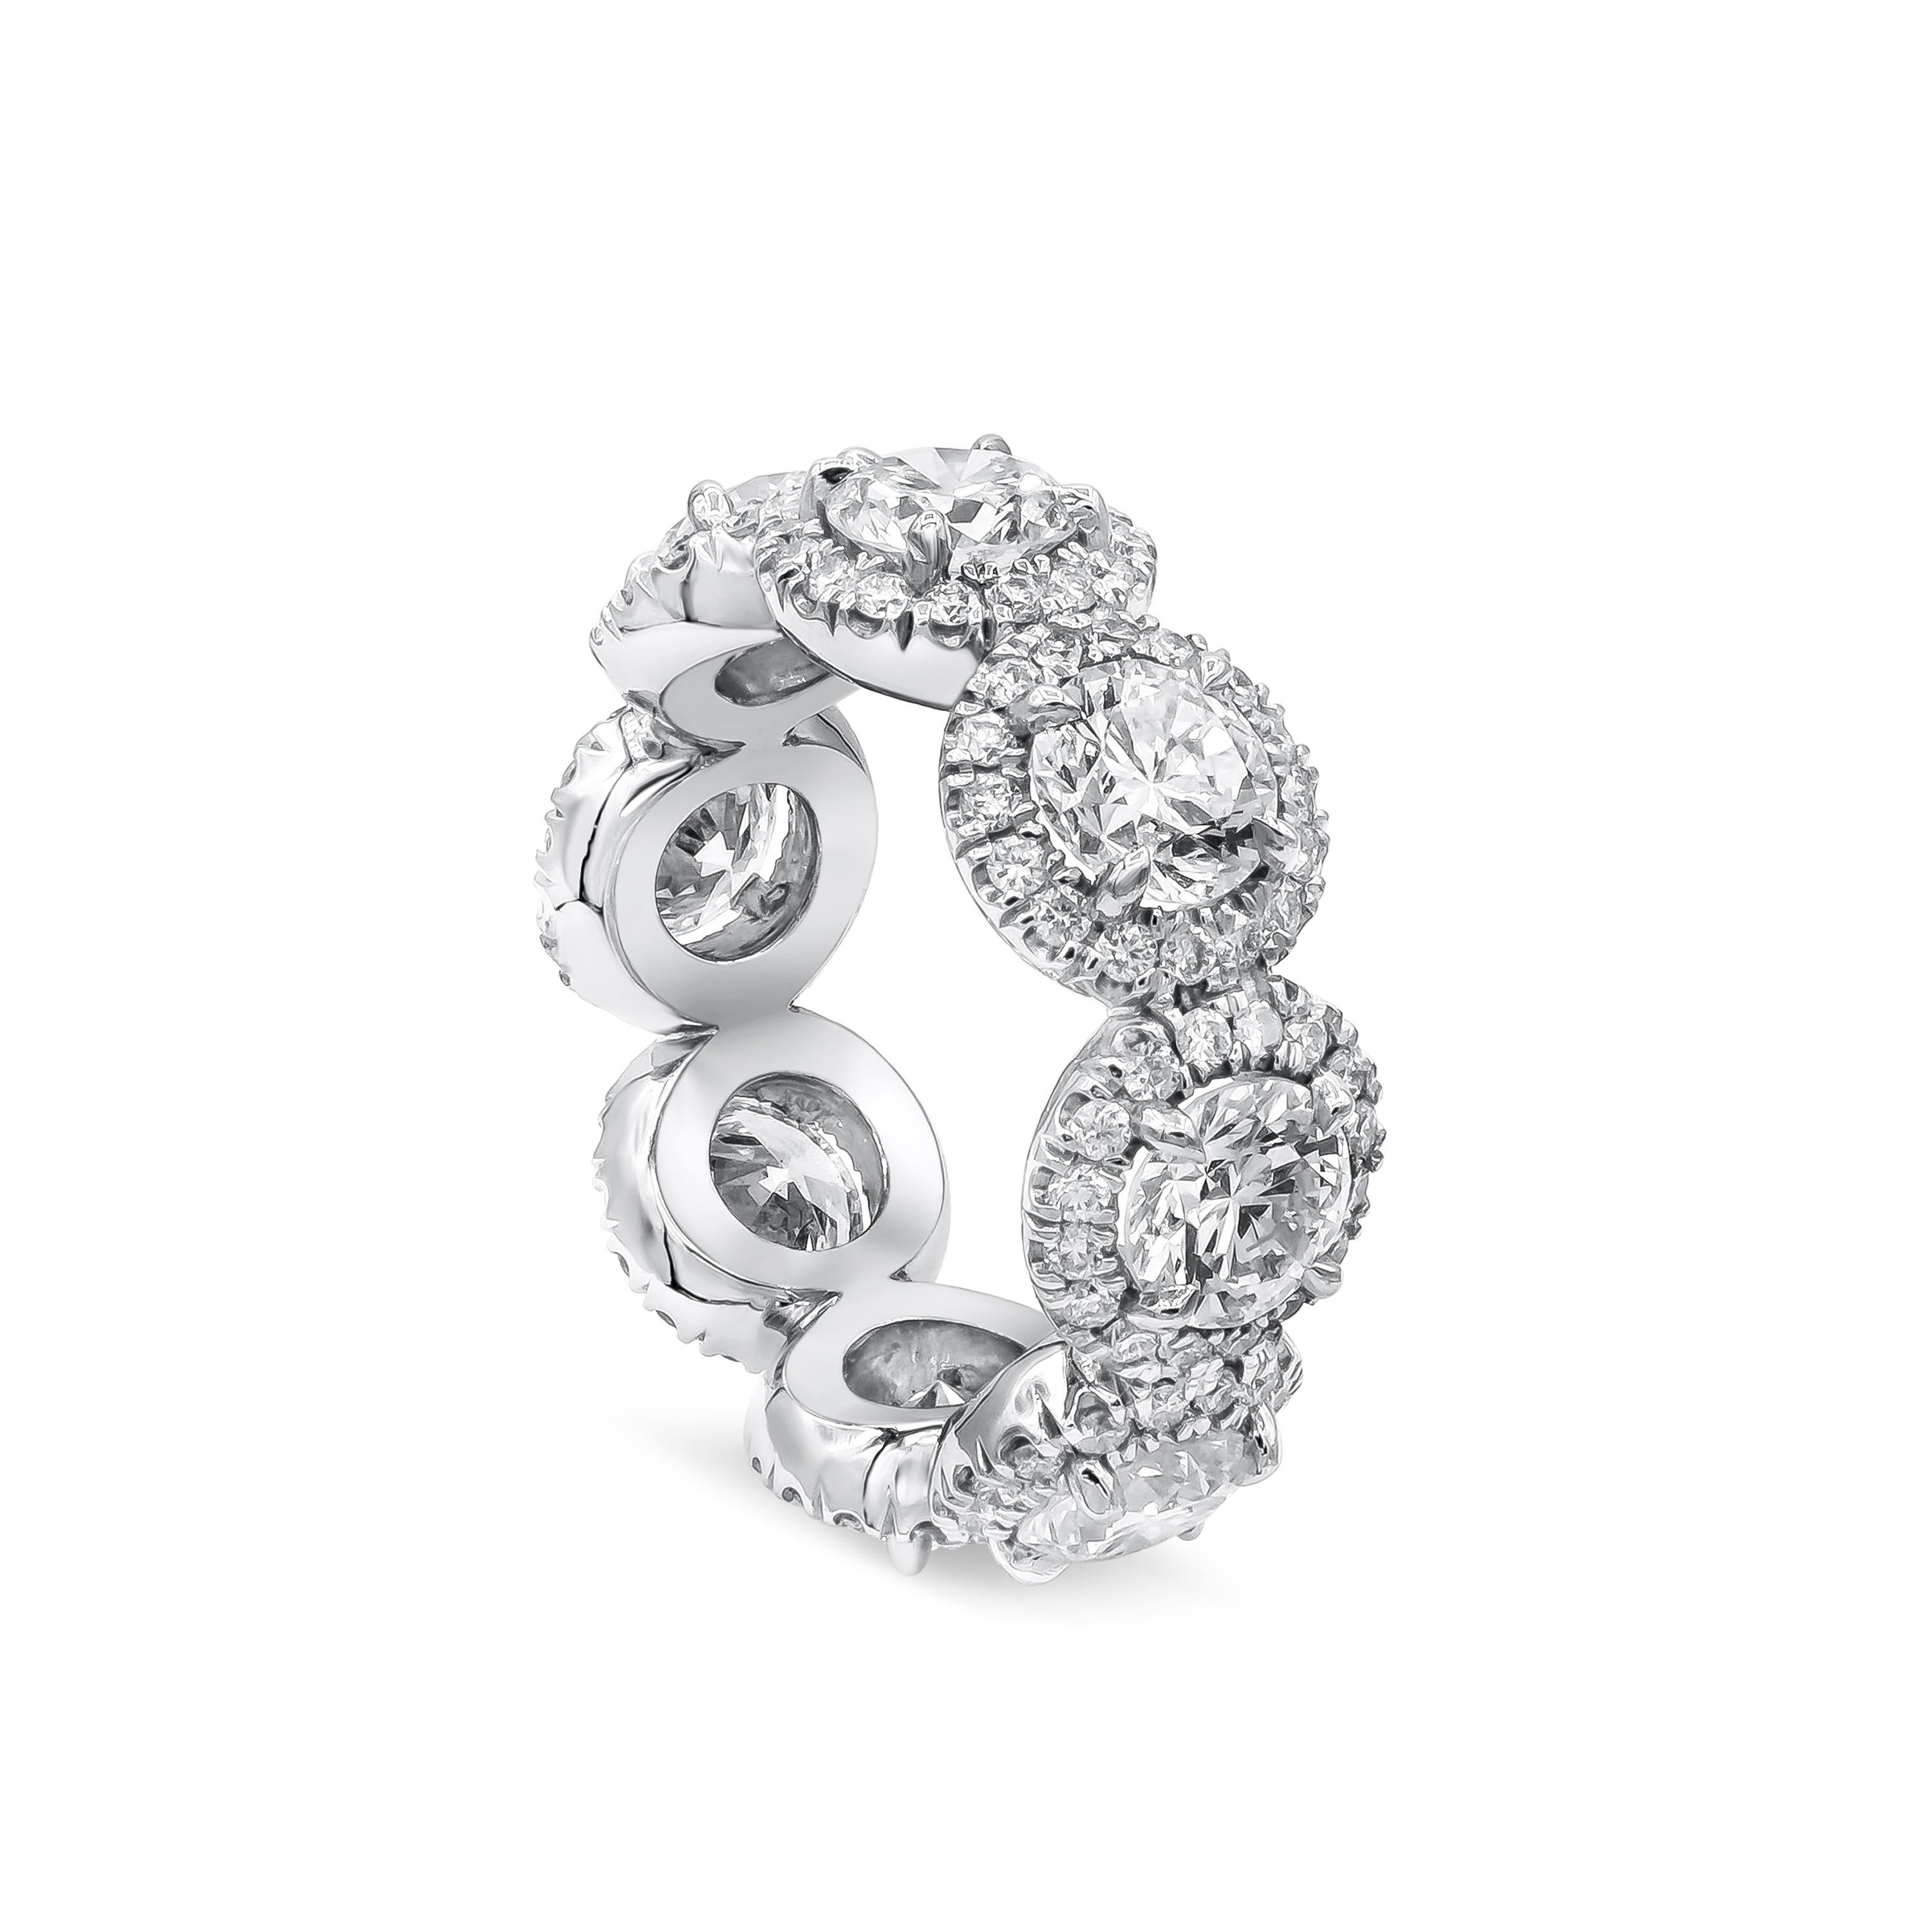 Elegantly crafted eternity wedding band ring showcasing eight round brilliant diamonds weighing 4.62 carats total, each set in a single row of round brilliant diamonds. Accent diamonds weighs 1.05 carat total. Made in platinum.

Style available in